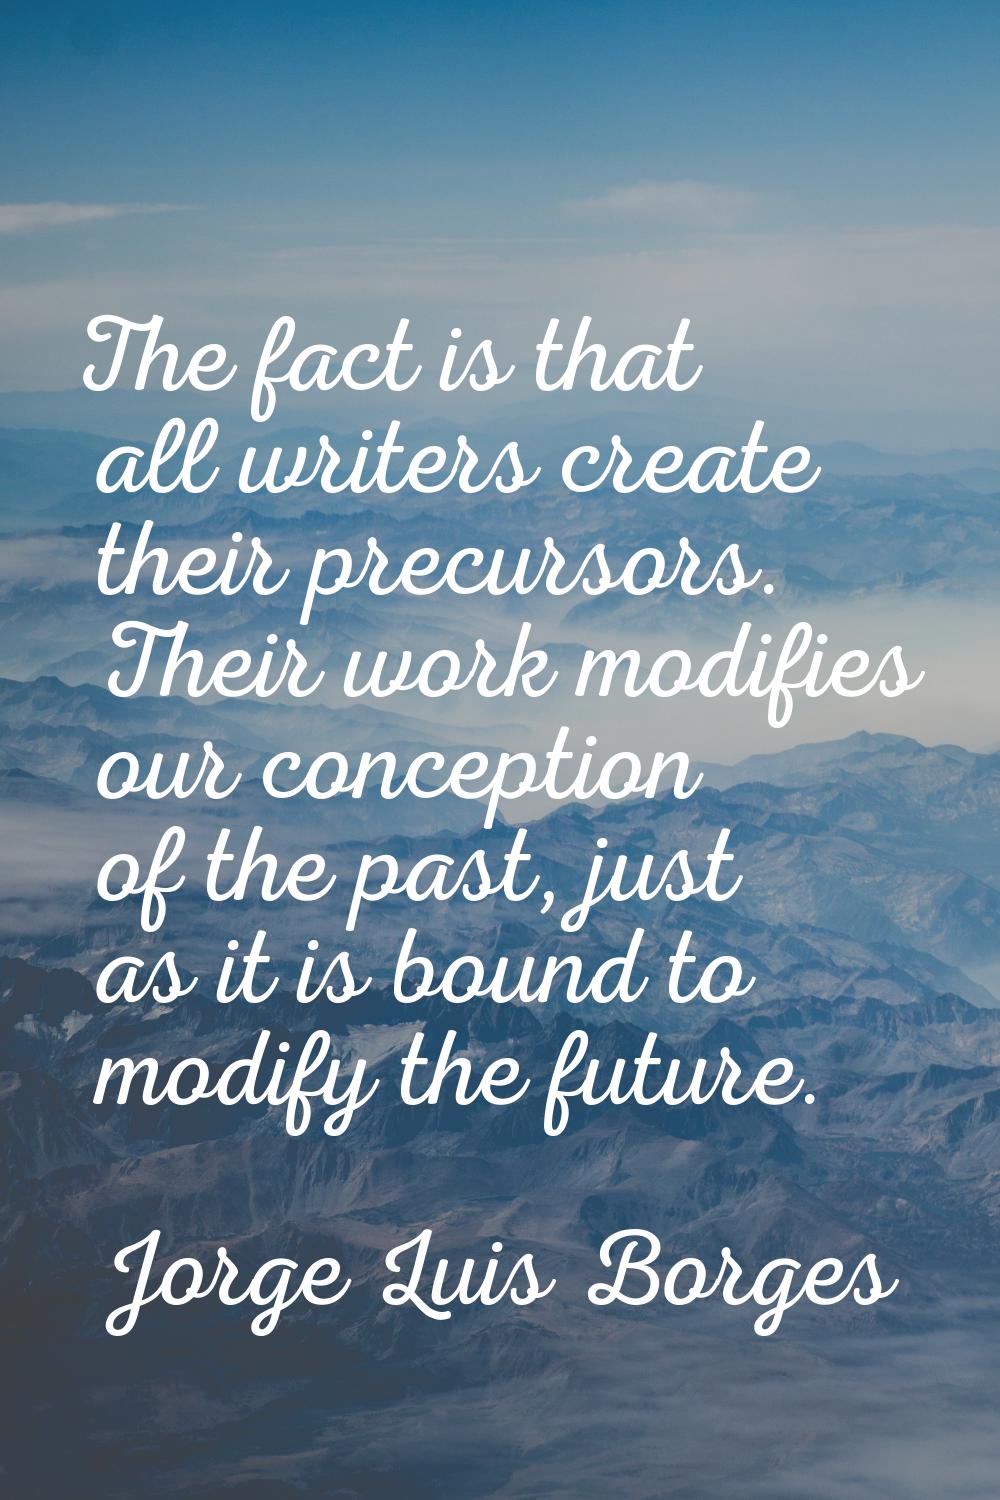 The fact is that all writers create their precursors. Their work modifies our conception of the pas